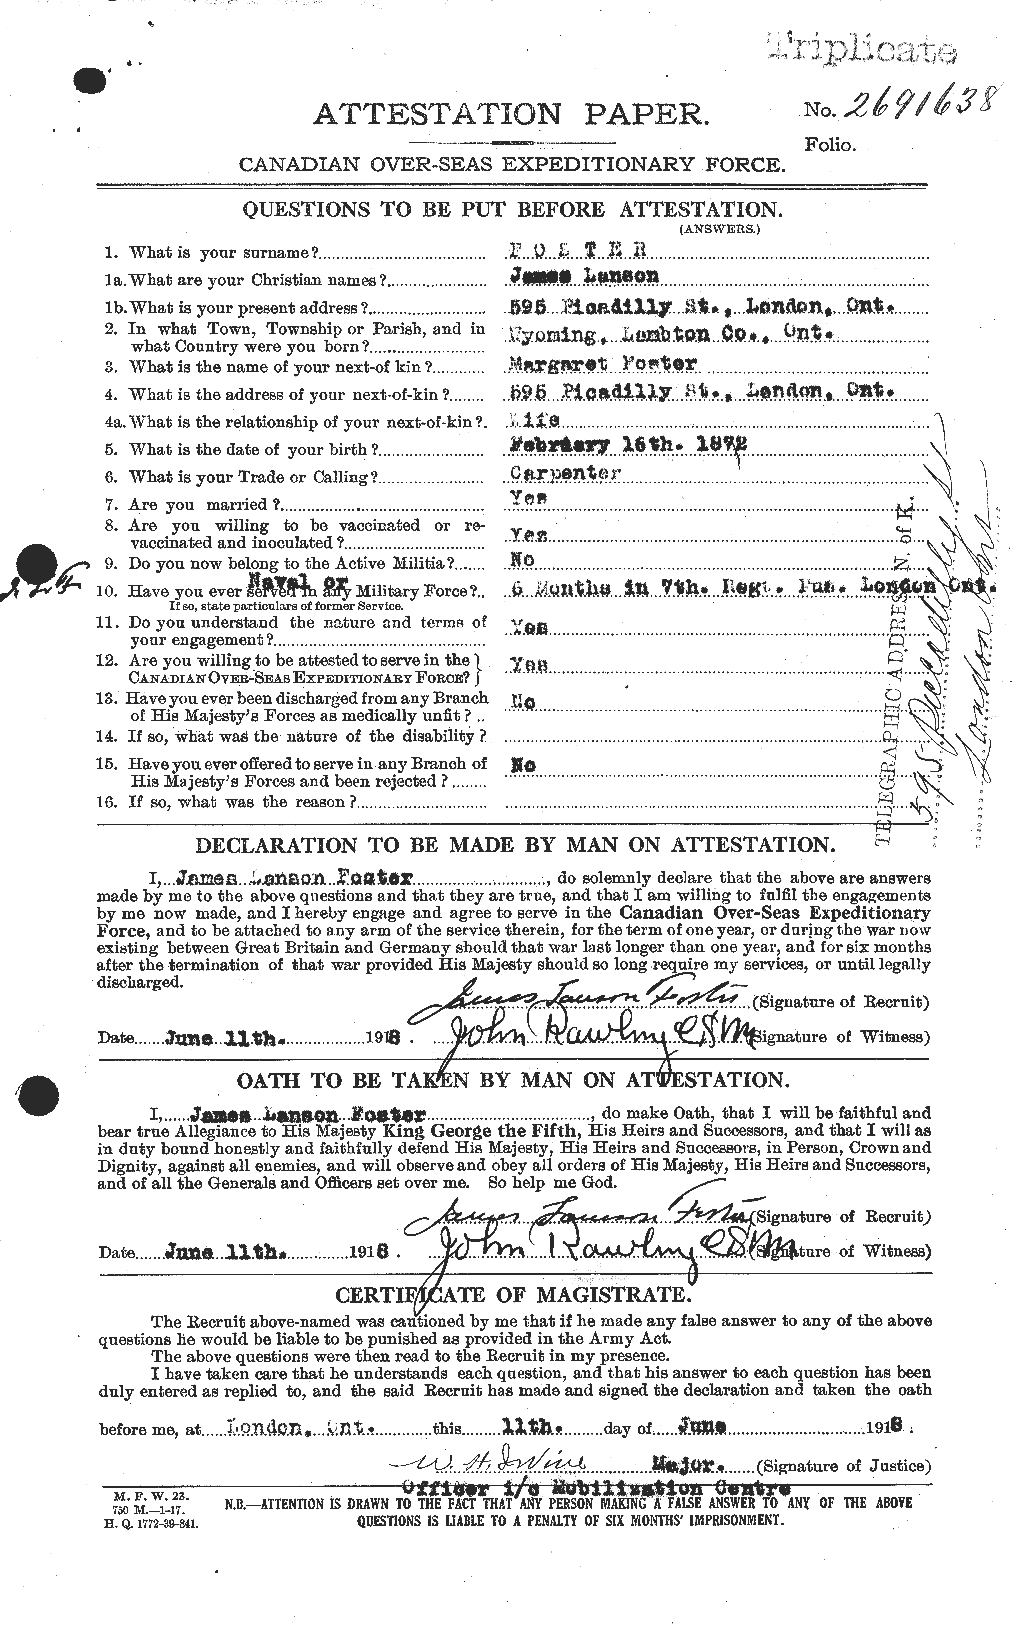 Personnel Records of the First World War - CEF 333311a